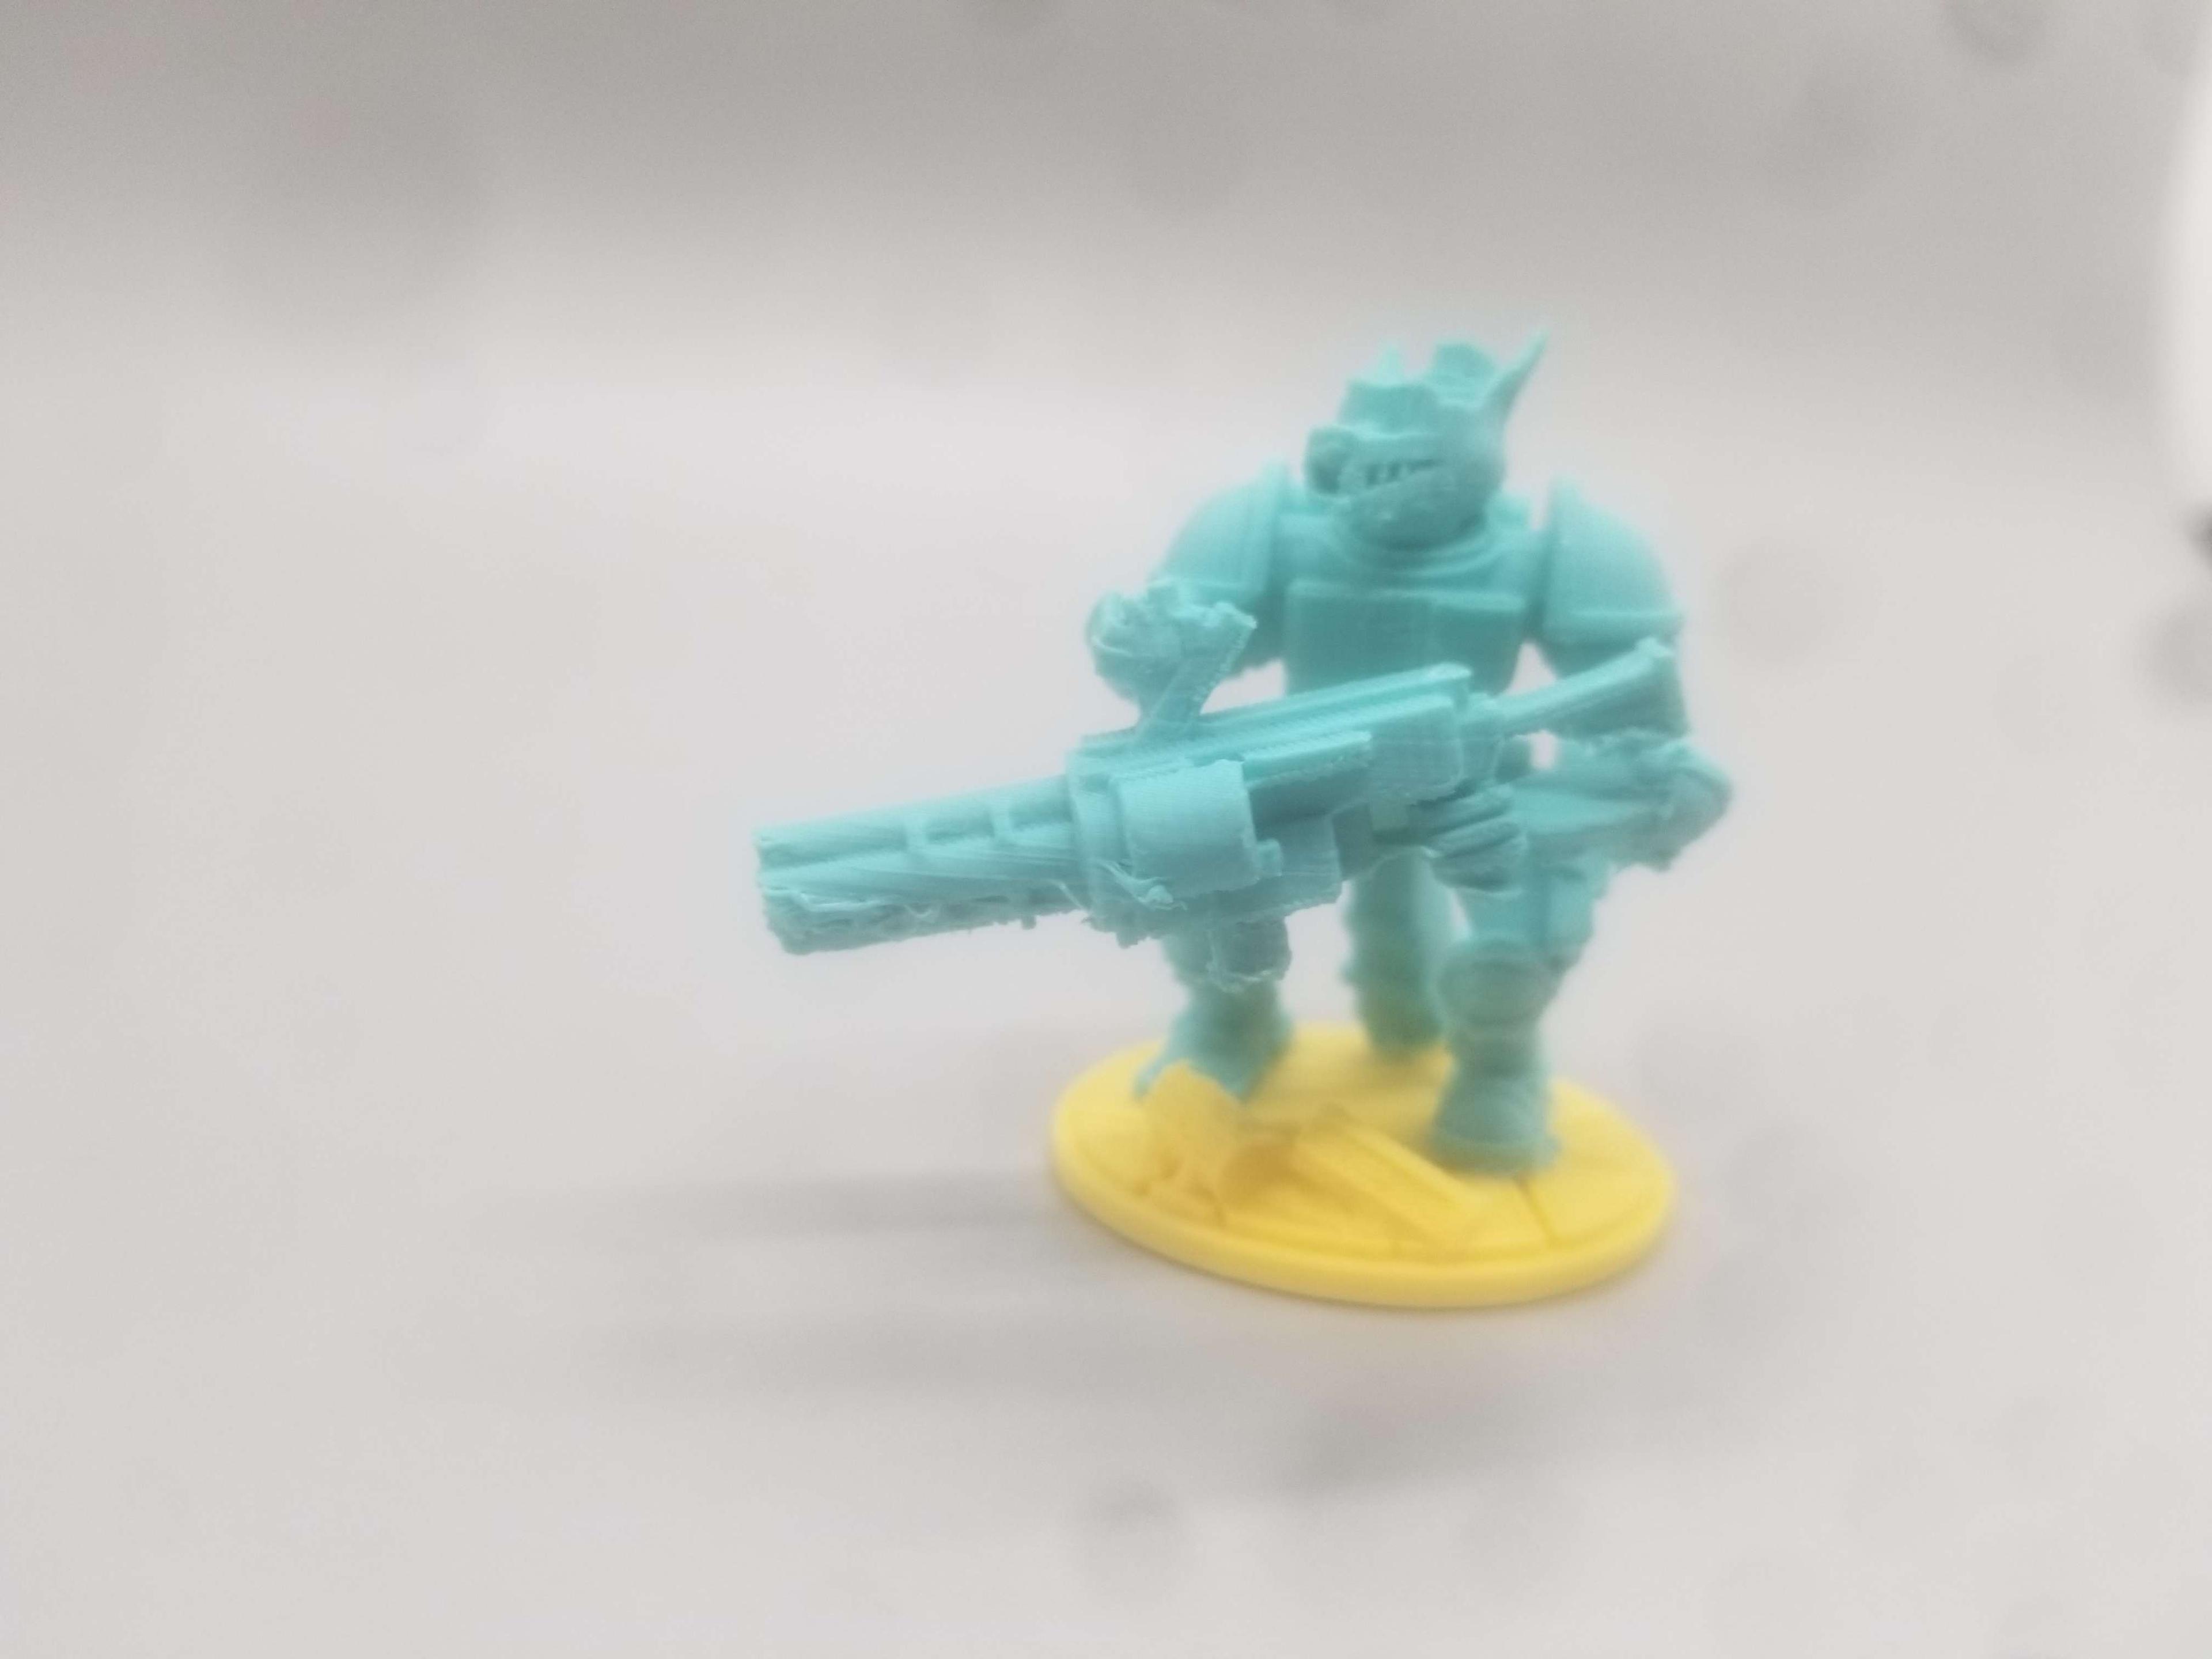 FHW Voidfang Eraser Rotary Cannon Trooper 3d model